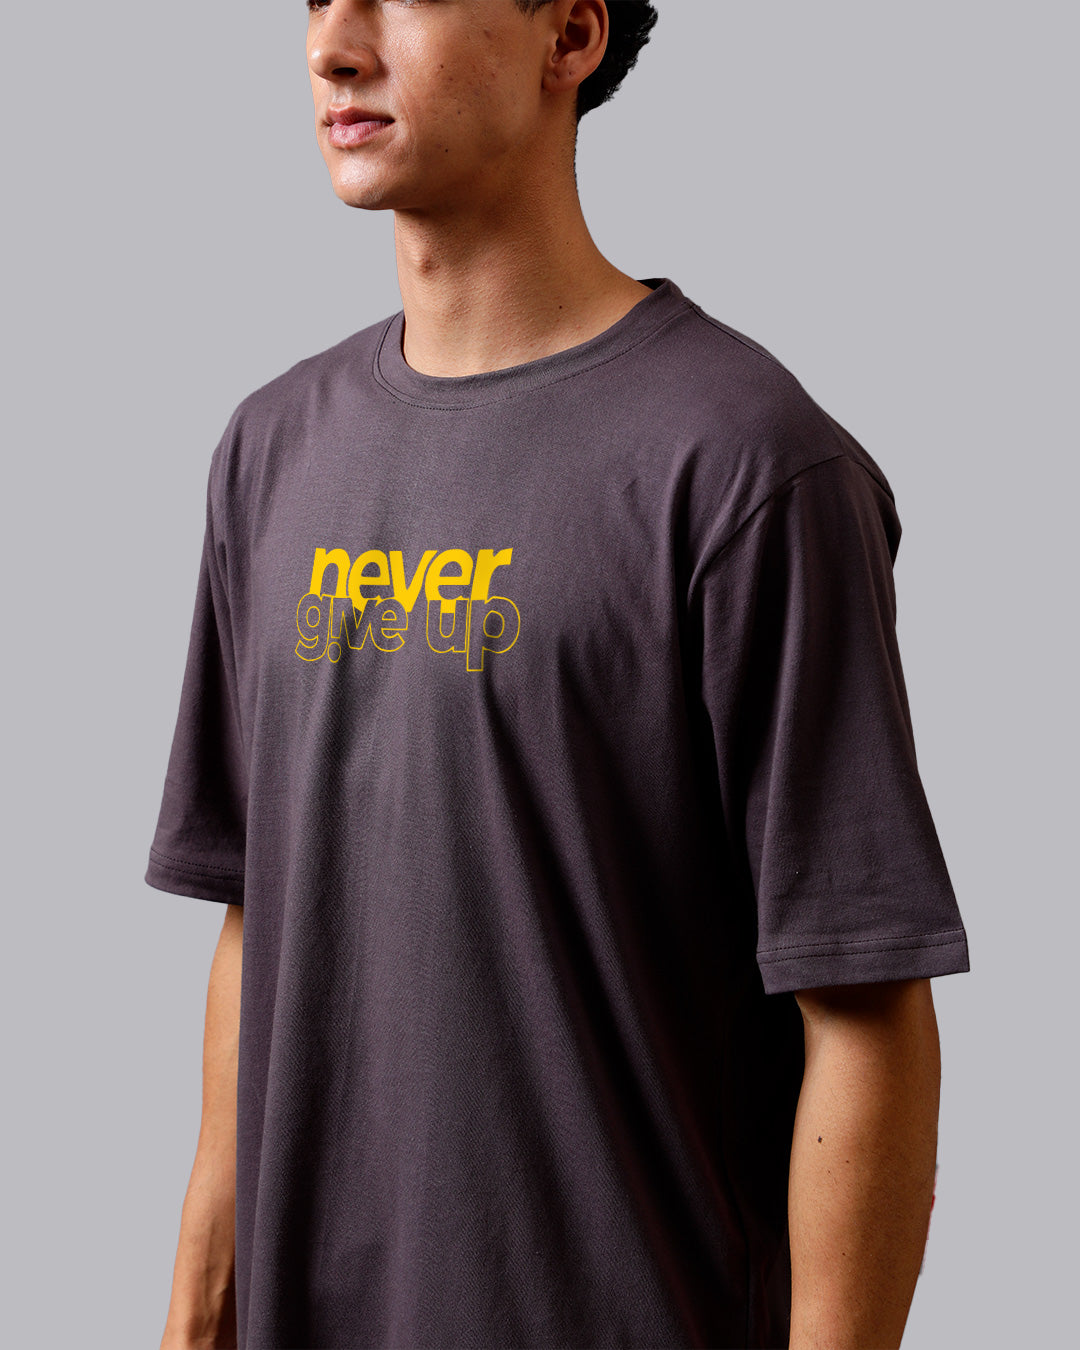 Never Give up Grey Oversized Men's Tshirt